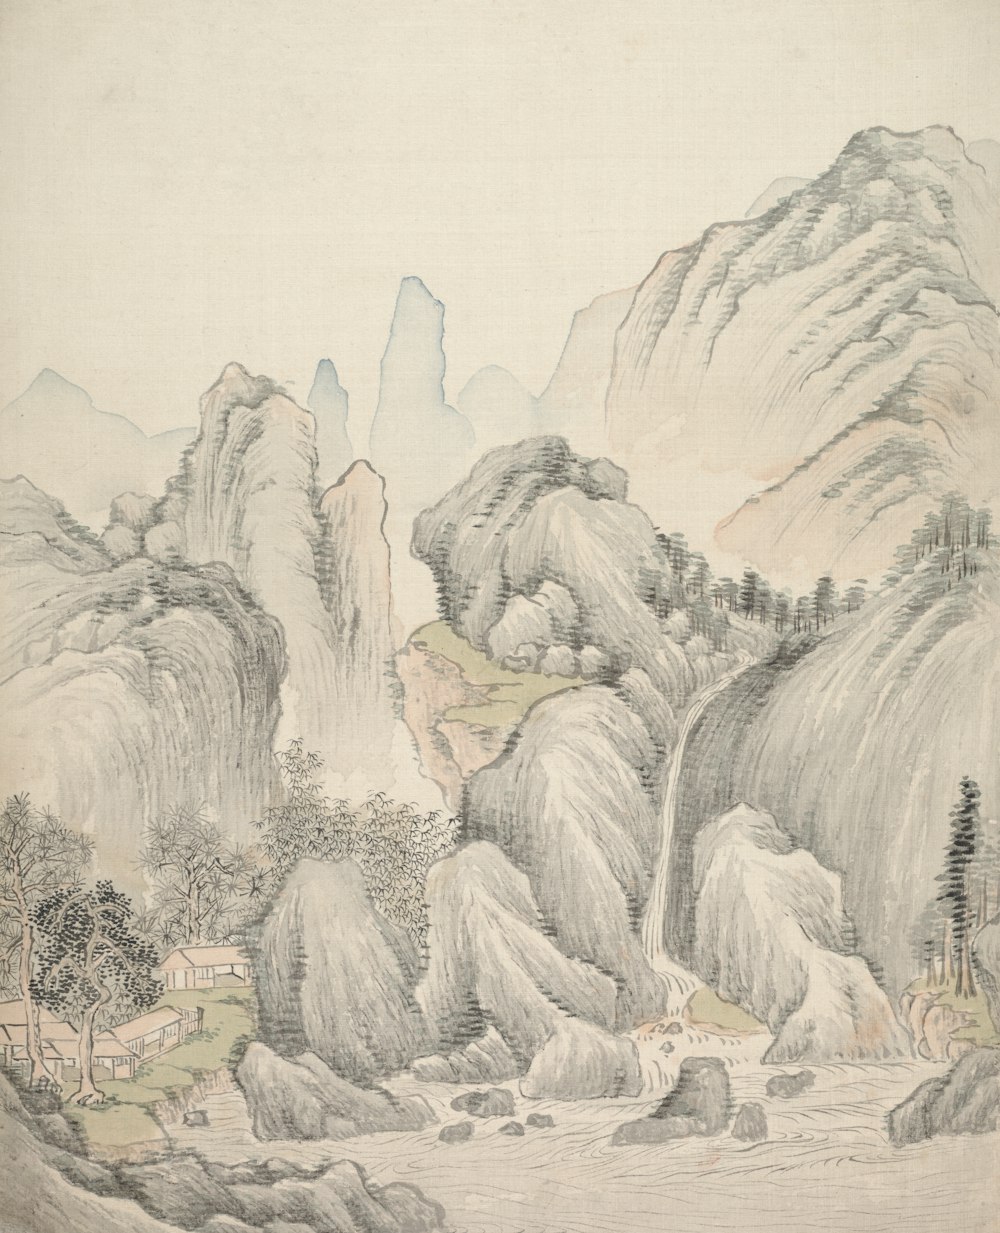 a drawing of a mountain landscape with trees